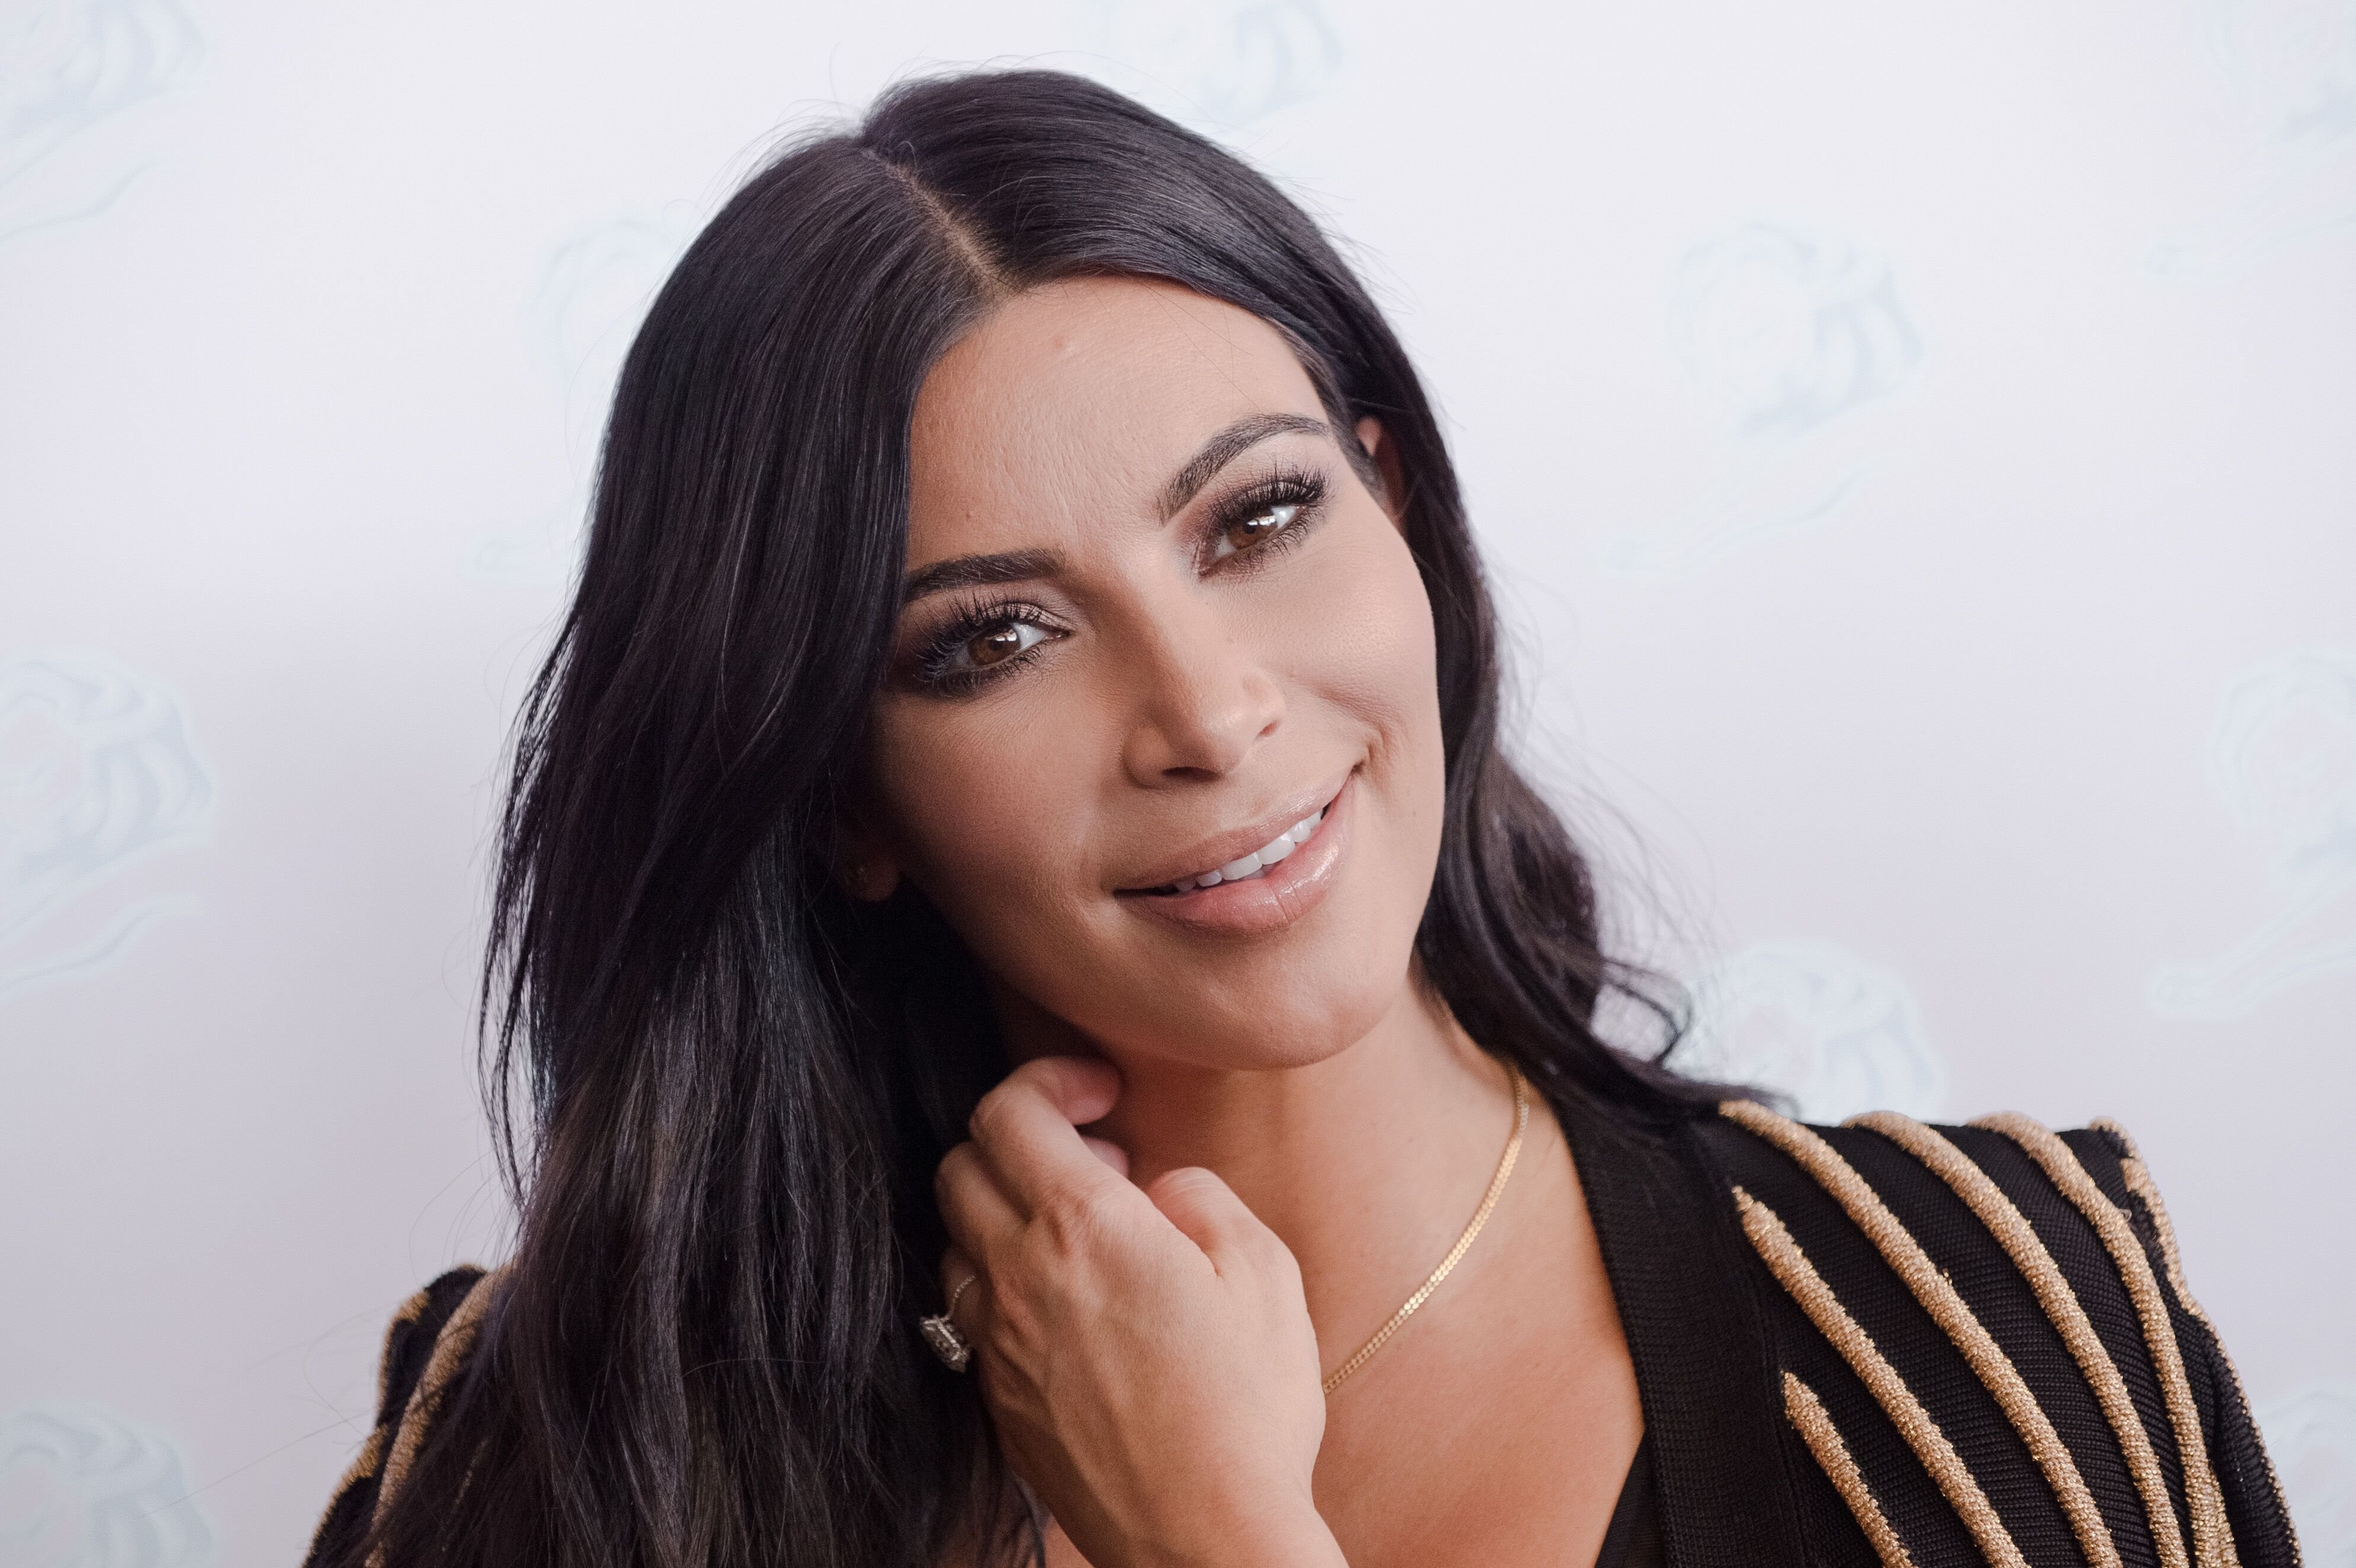 Kim Kardashian at Cannes Lions International Festival of Creativity on June 24, 2015. | Photo: Getty Images